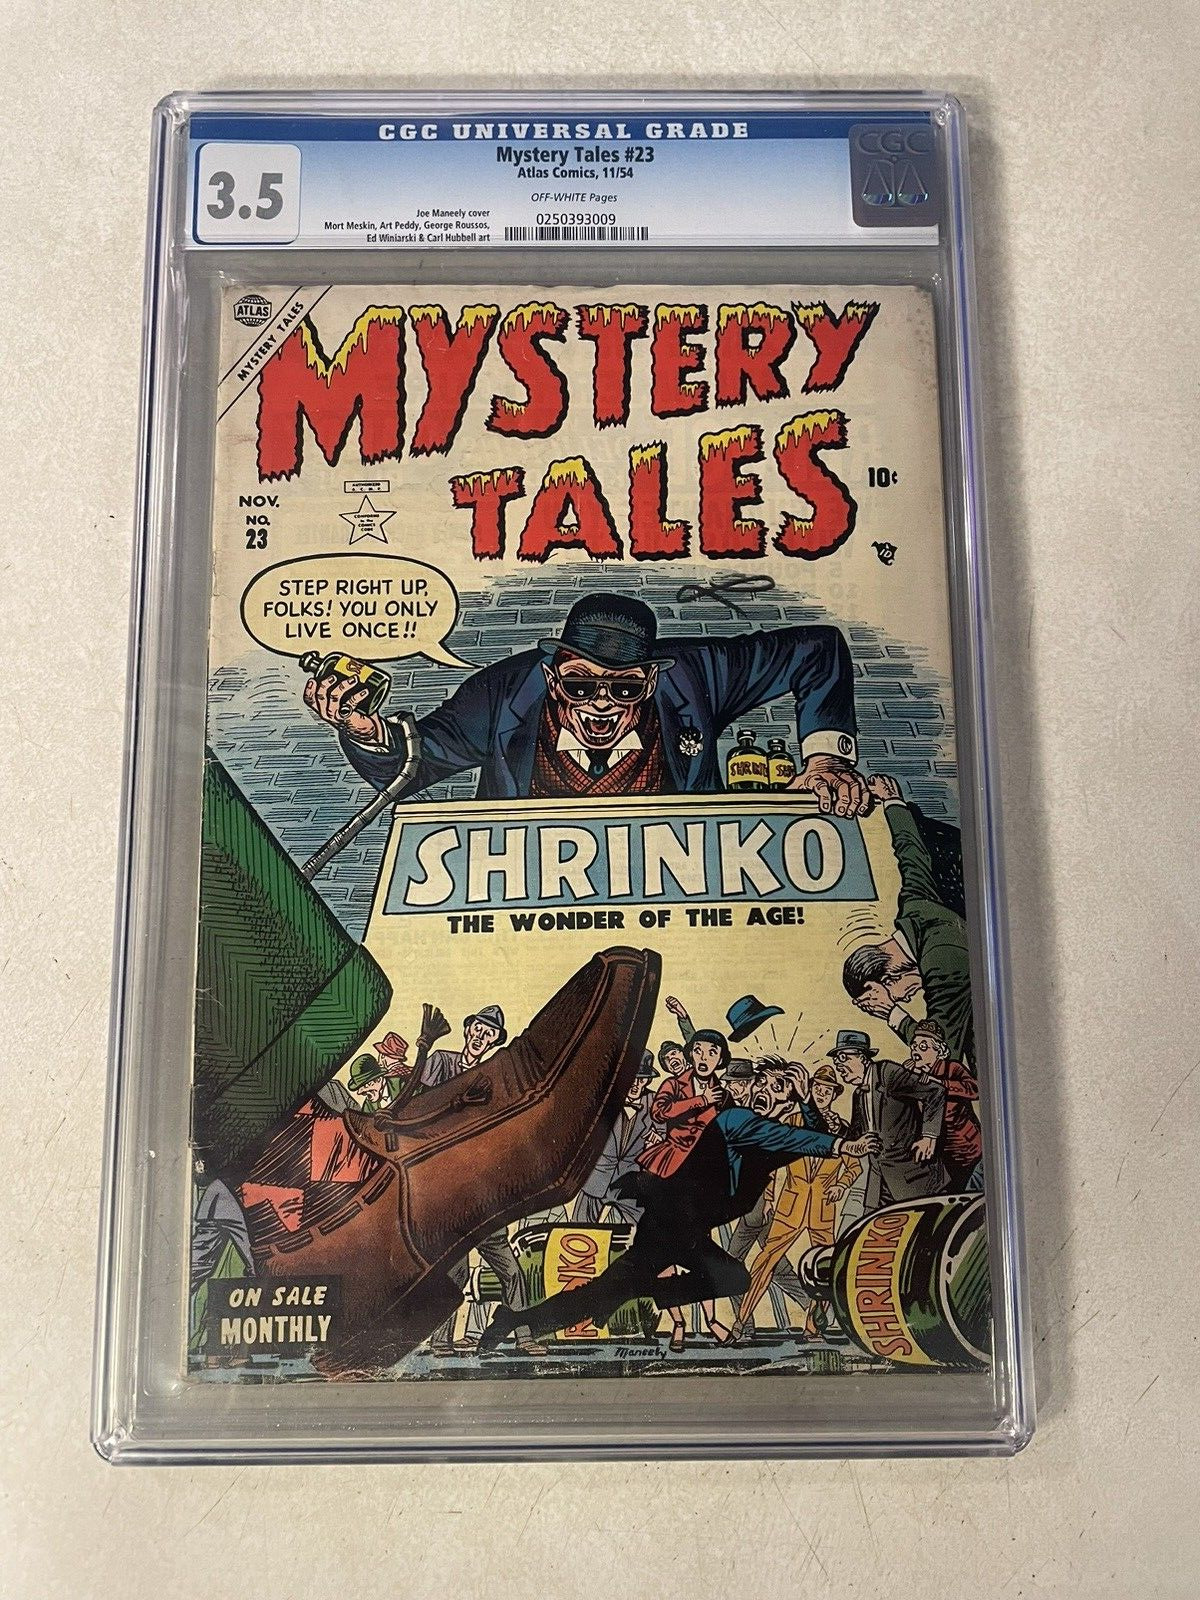 MYSTERY TALES #23 CGC 3.5 SHRINKO ATLAS 1954 YOU ONLY LIVE ONCE